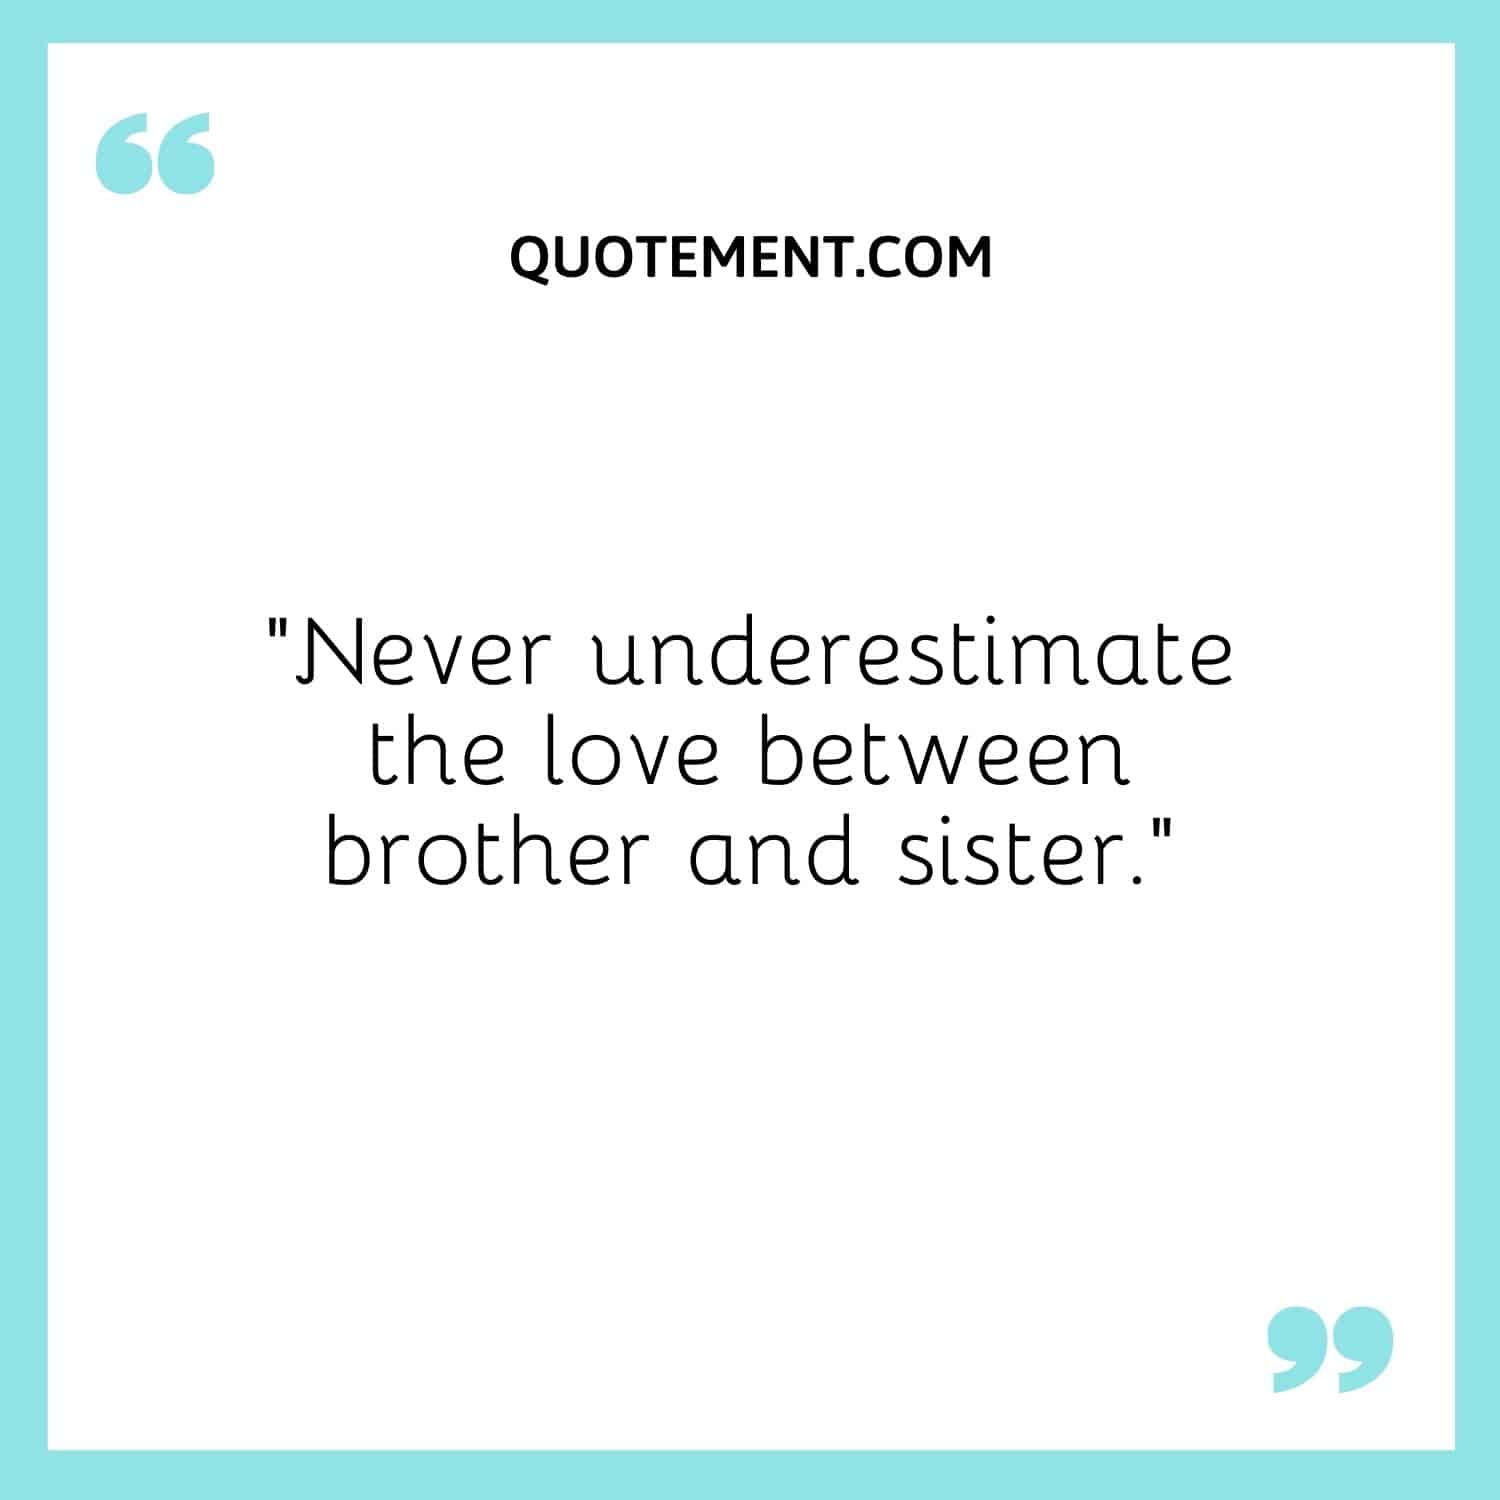 Never underestimate the love between brother and sister.